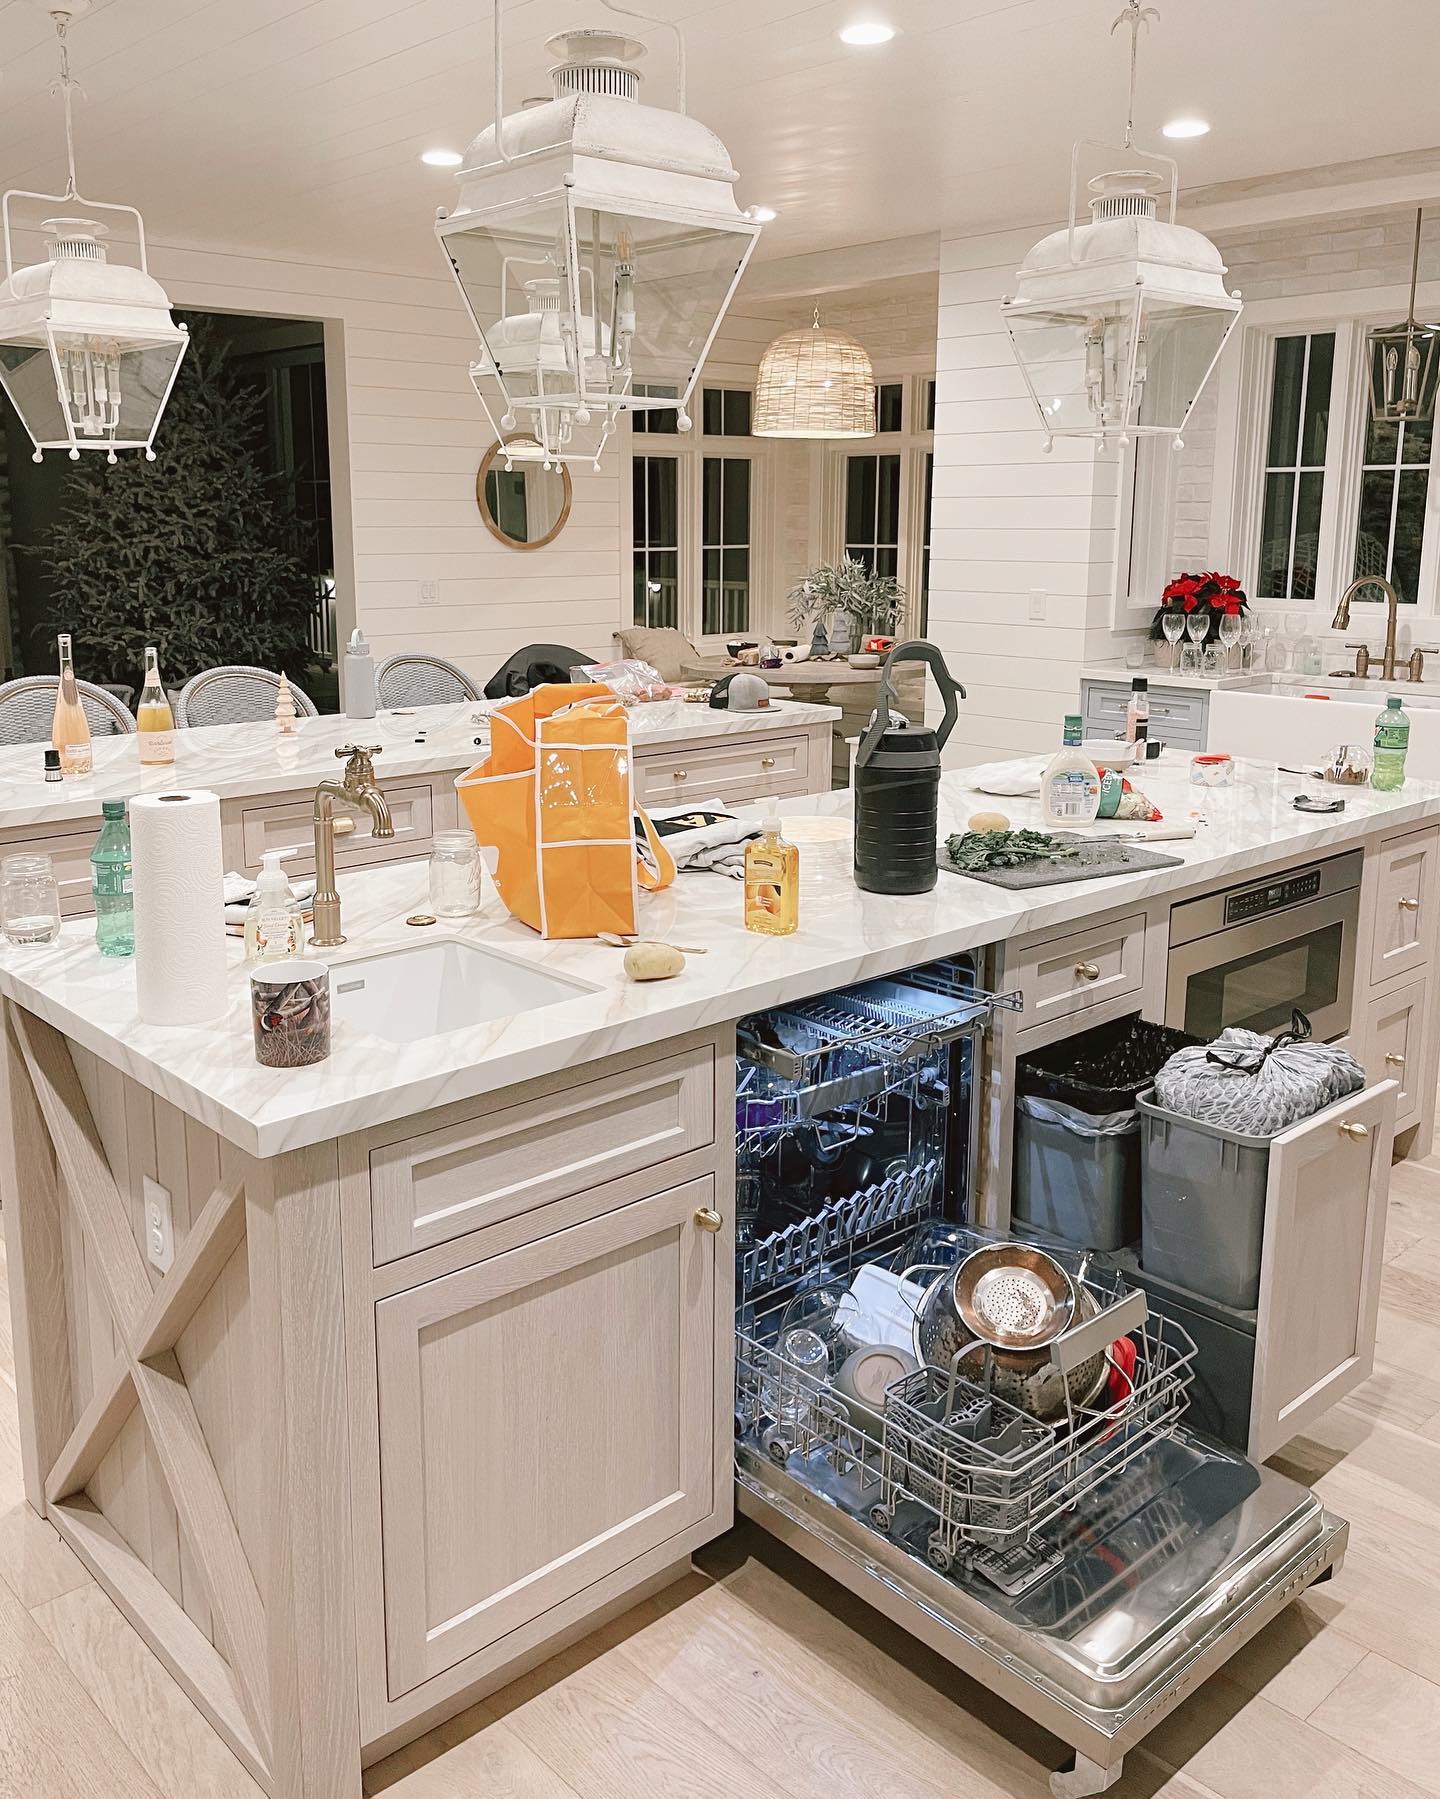 Double tap if you like seeing real life pics! If you ever wondered what my kitchen looked like in its normal state, here it is 😂. Now let’s see yours!